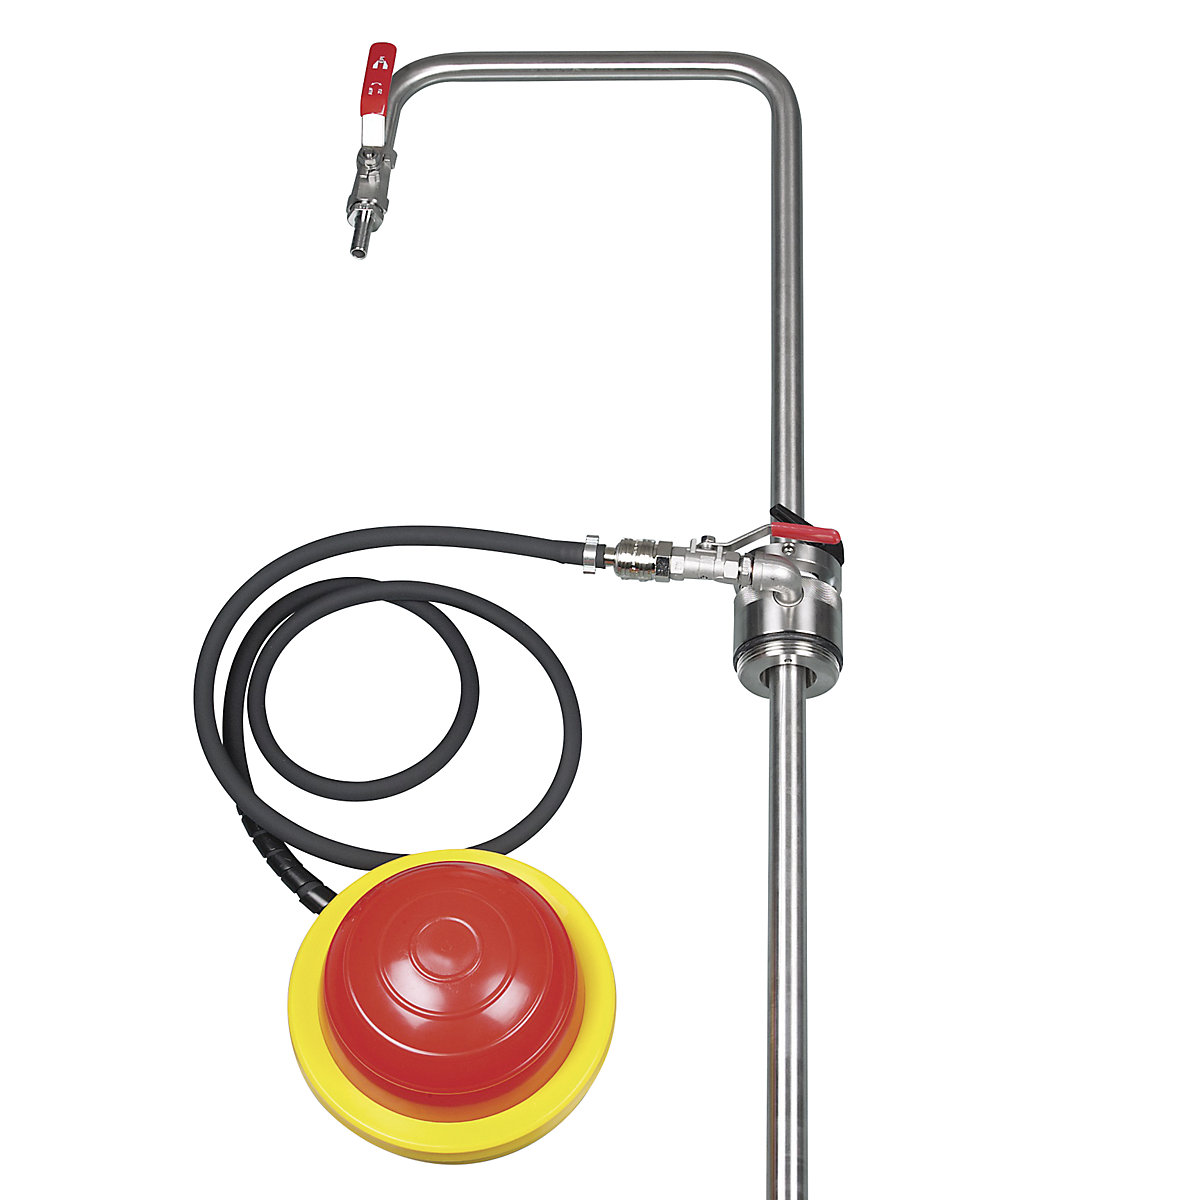 Stainless steel solvent pump, foot operated